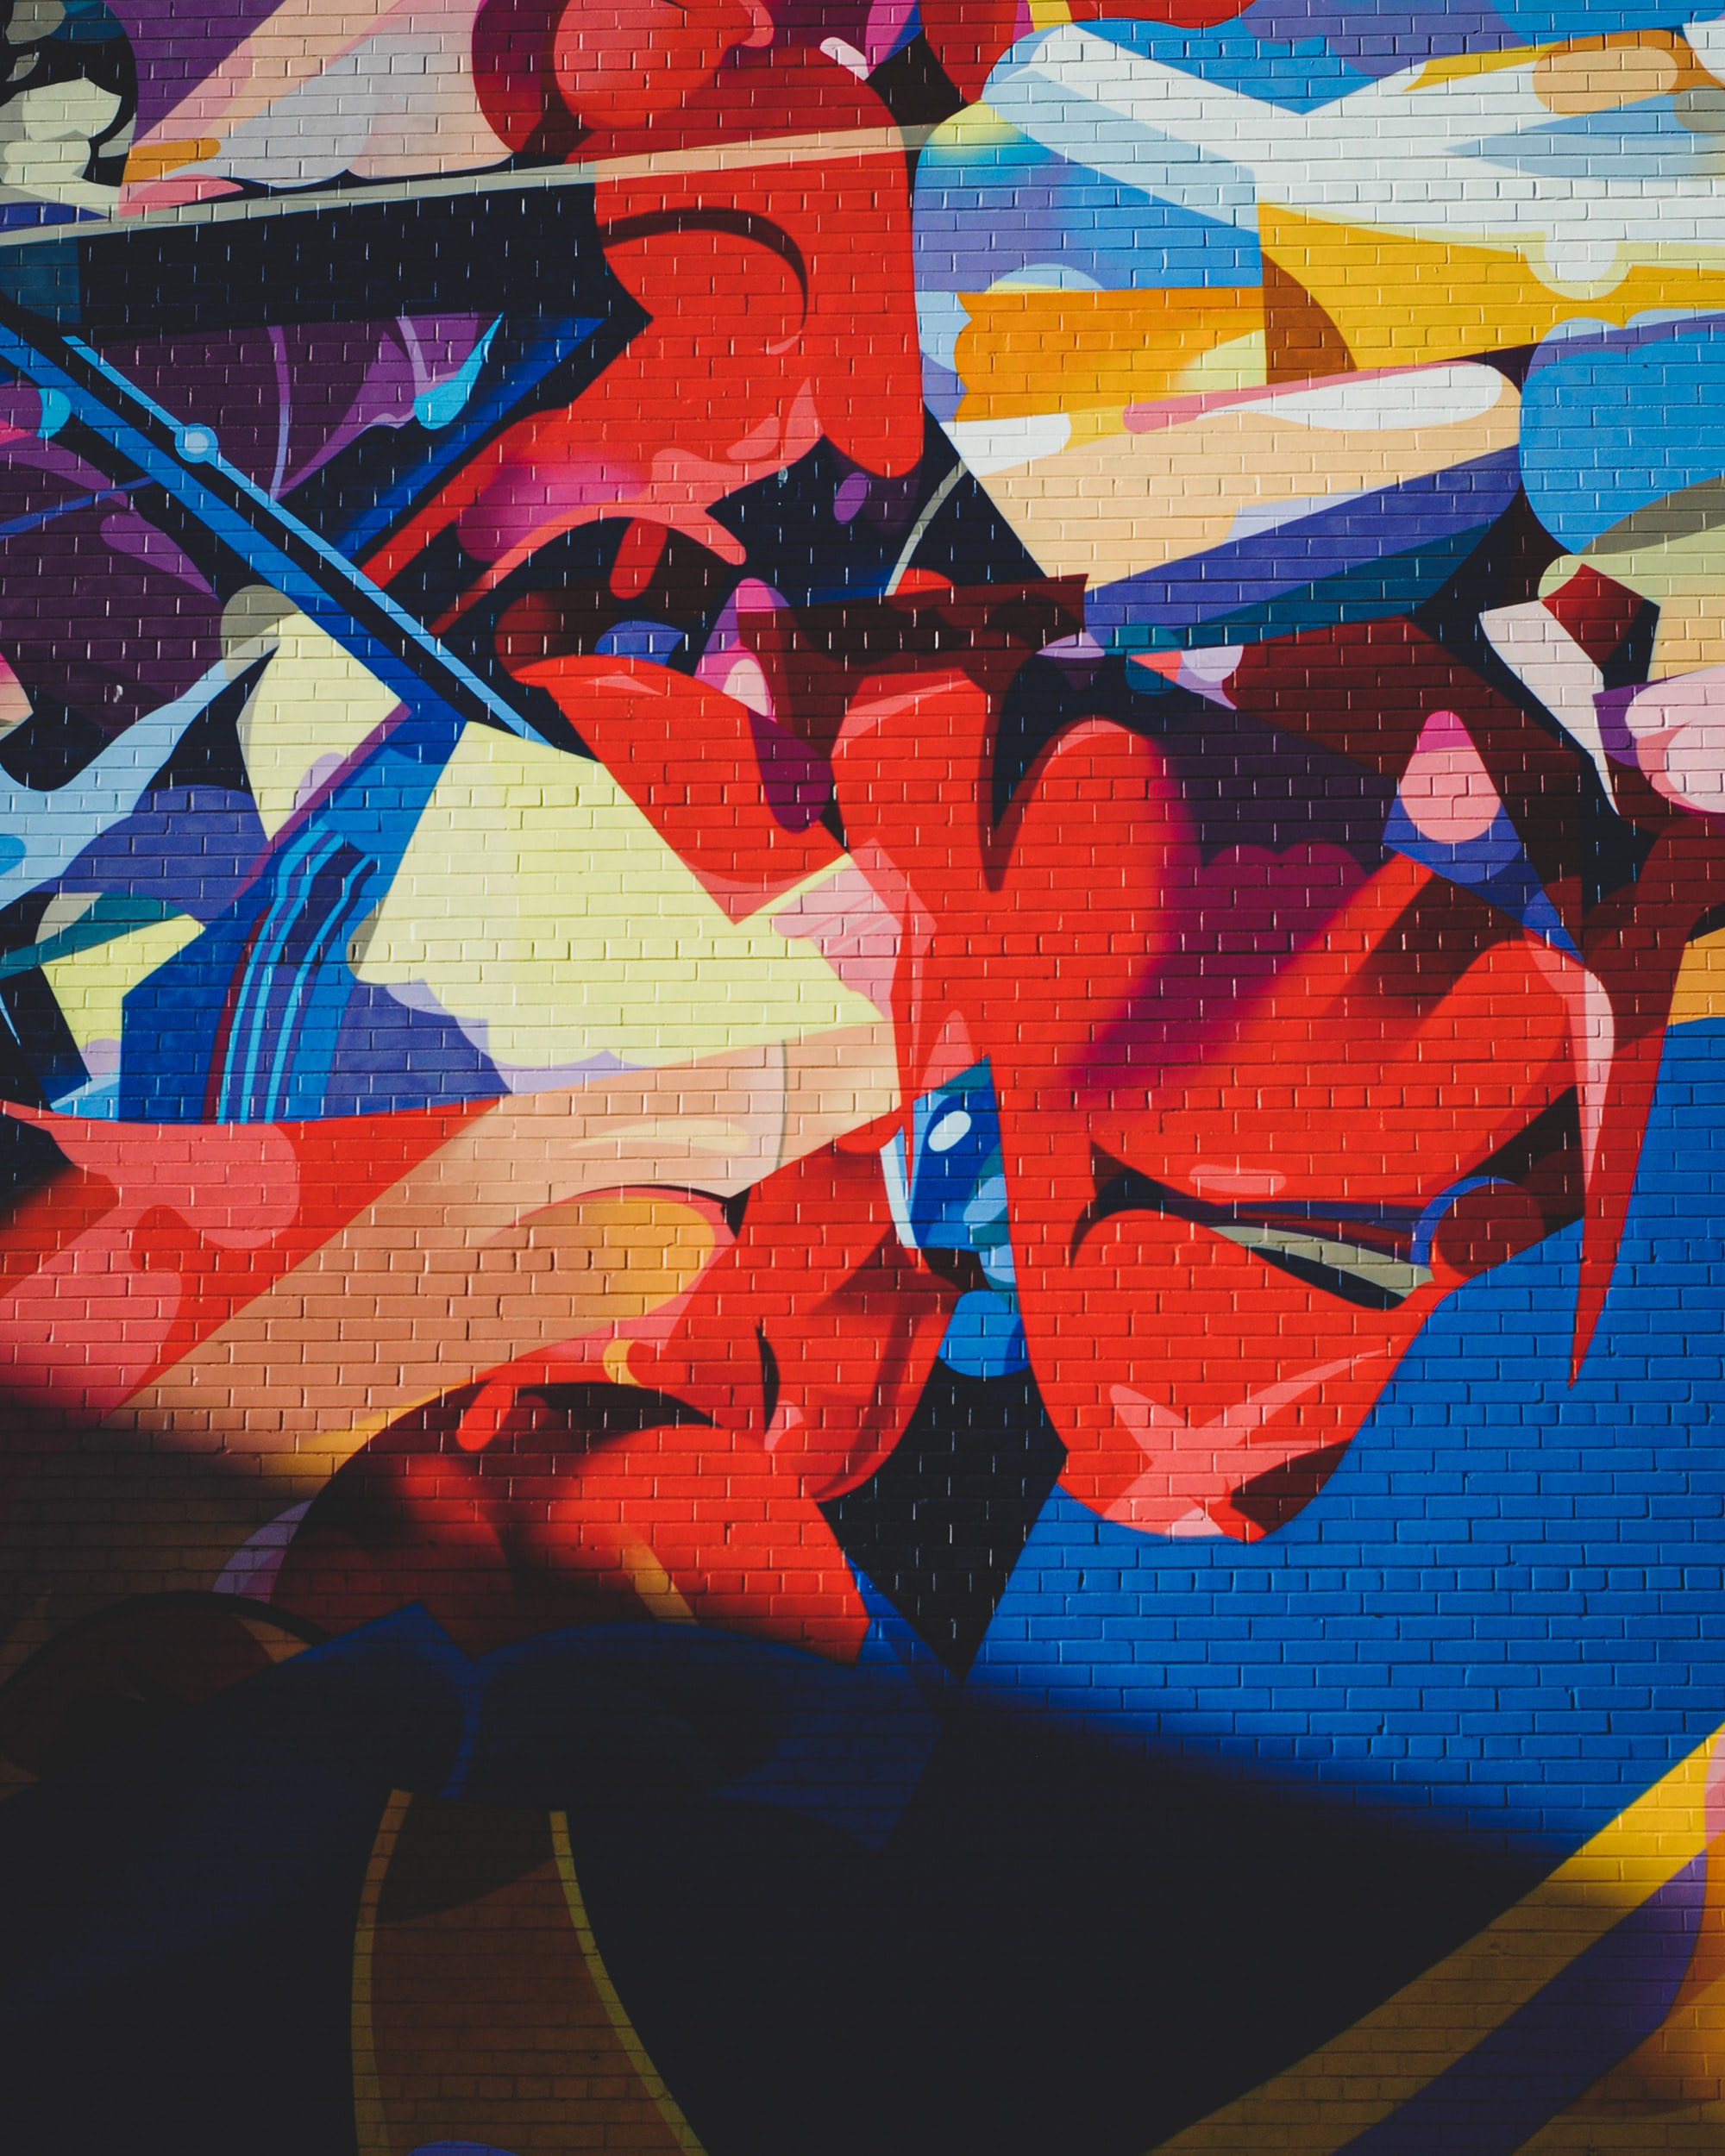 paint, graffiti, abstract, multicolored, motley, wall HD for desktop 1080p